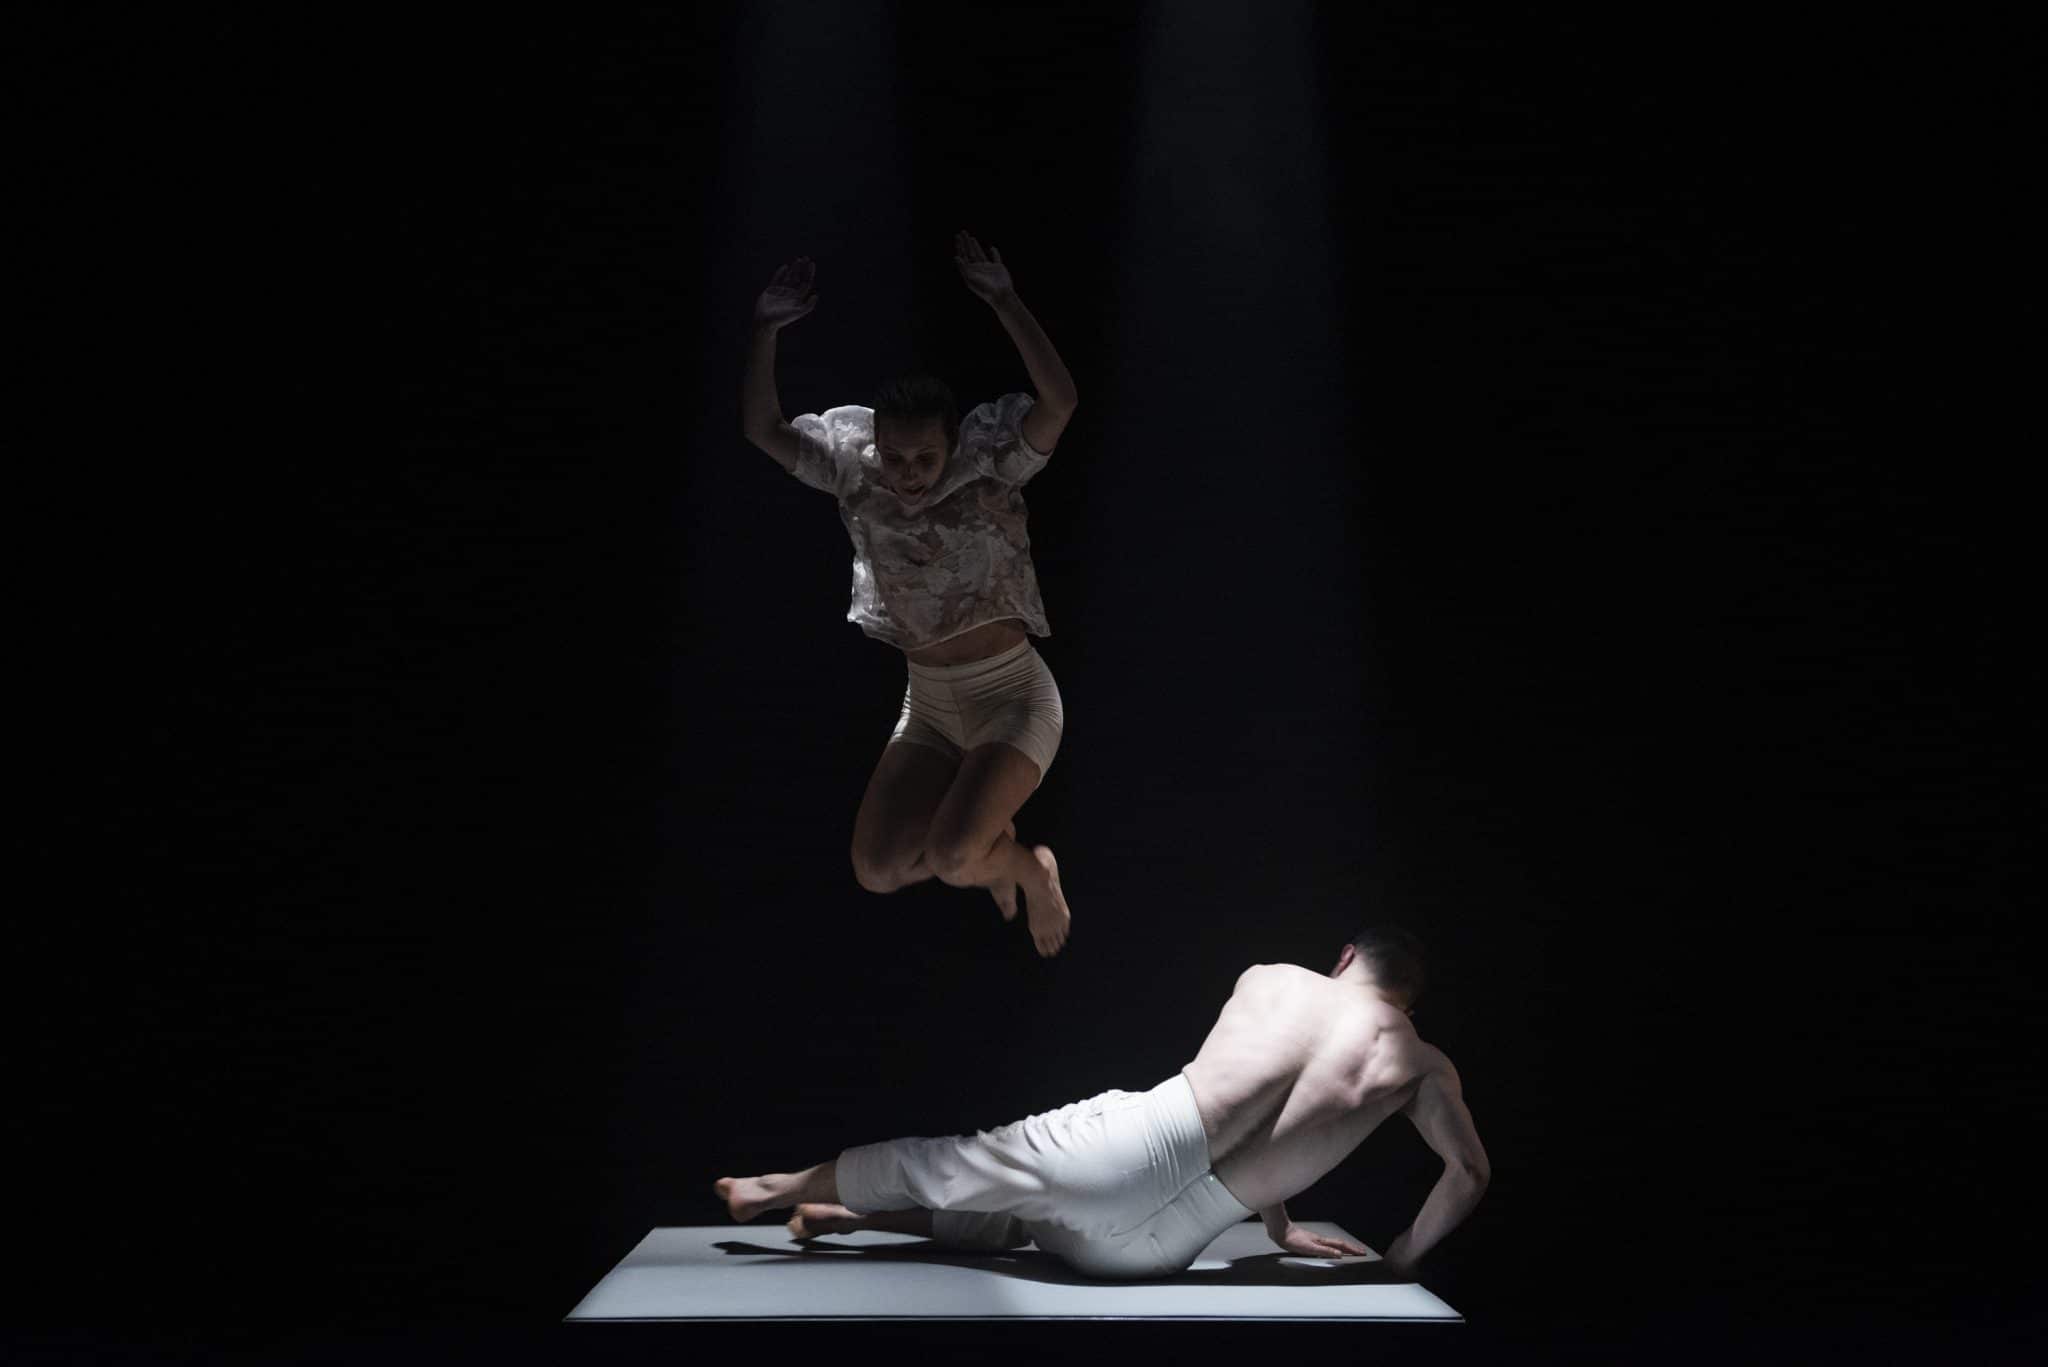 One dance is jumping mid air above a second dancer who is lying on the floor, attempting to get up. From Brink, 2020, commissioned by Maiden Voyage Dance Company. Photo Credit Luca Truffarelli